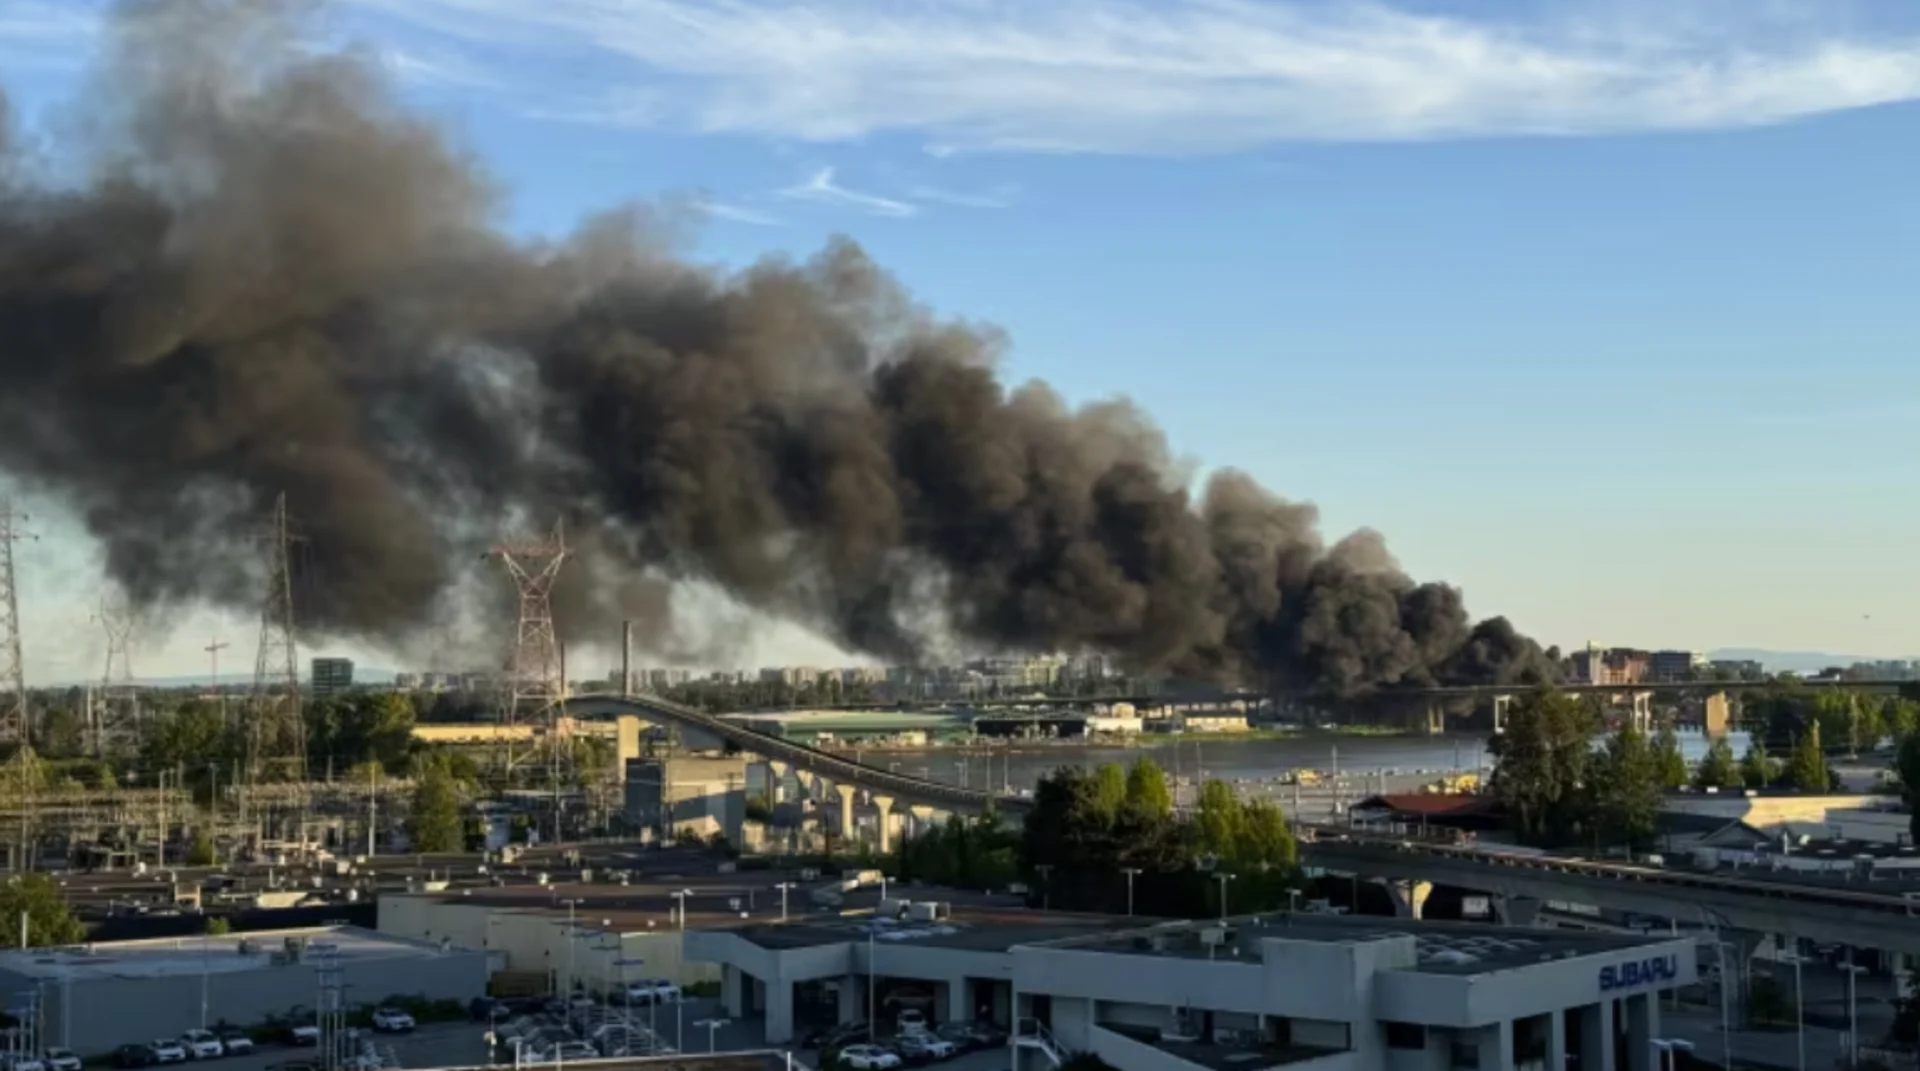 Large fire breaks out near Oak Street Bridge in Richmond, B.C., impacting travel and air quality. See what happened, here